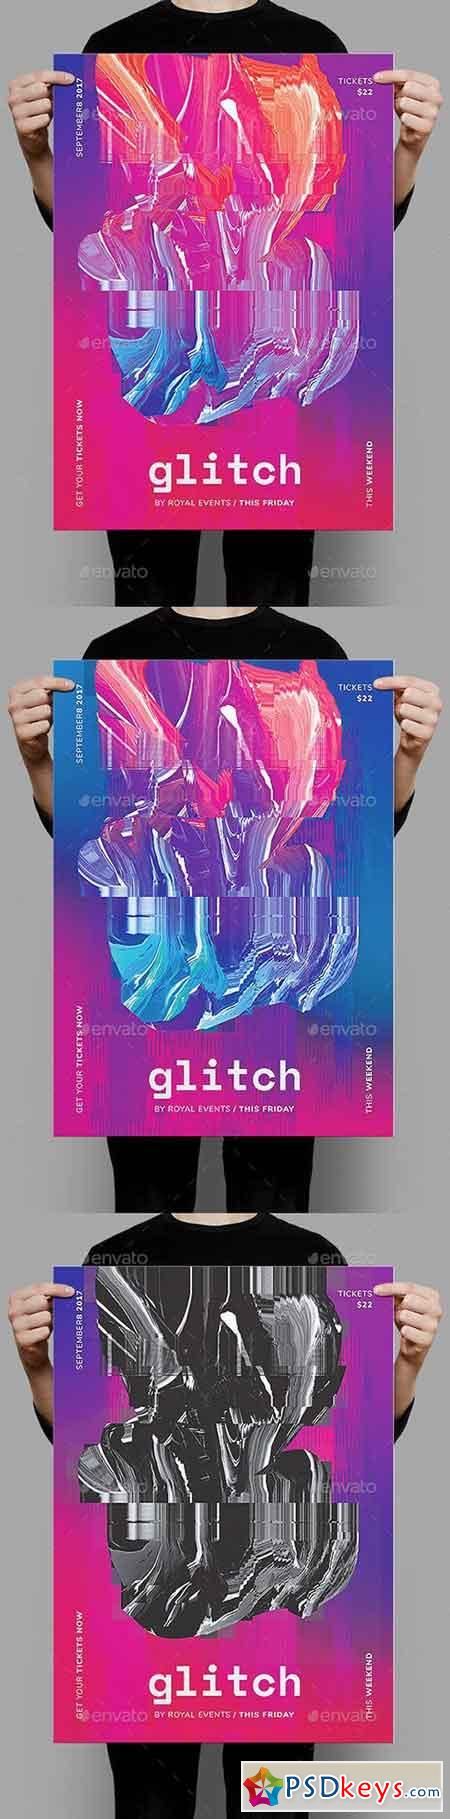 Glitch Poster Flyer Template 20612619